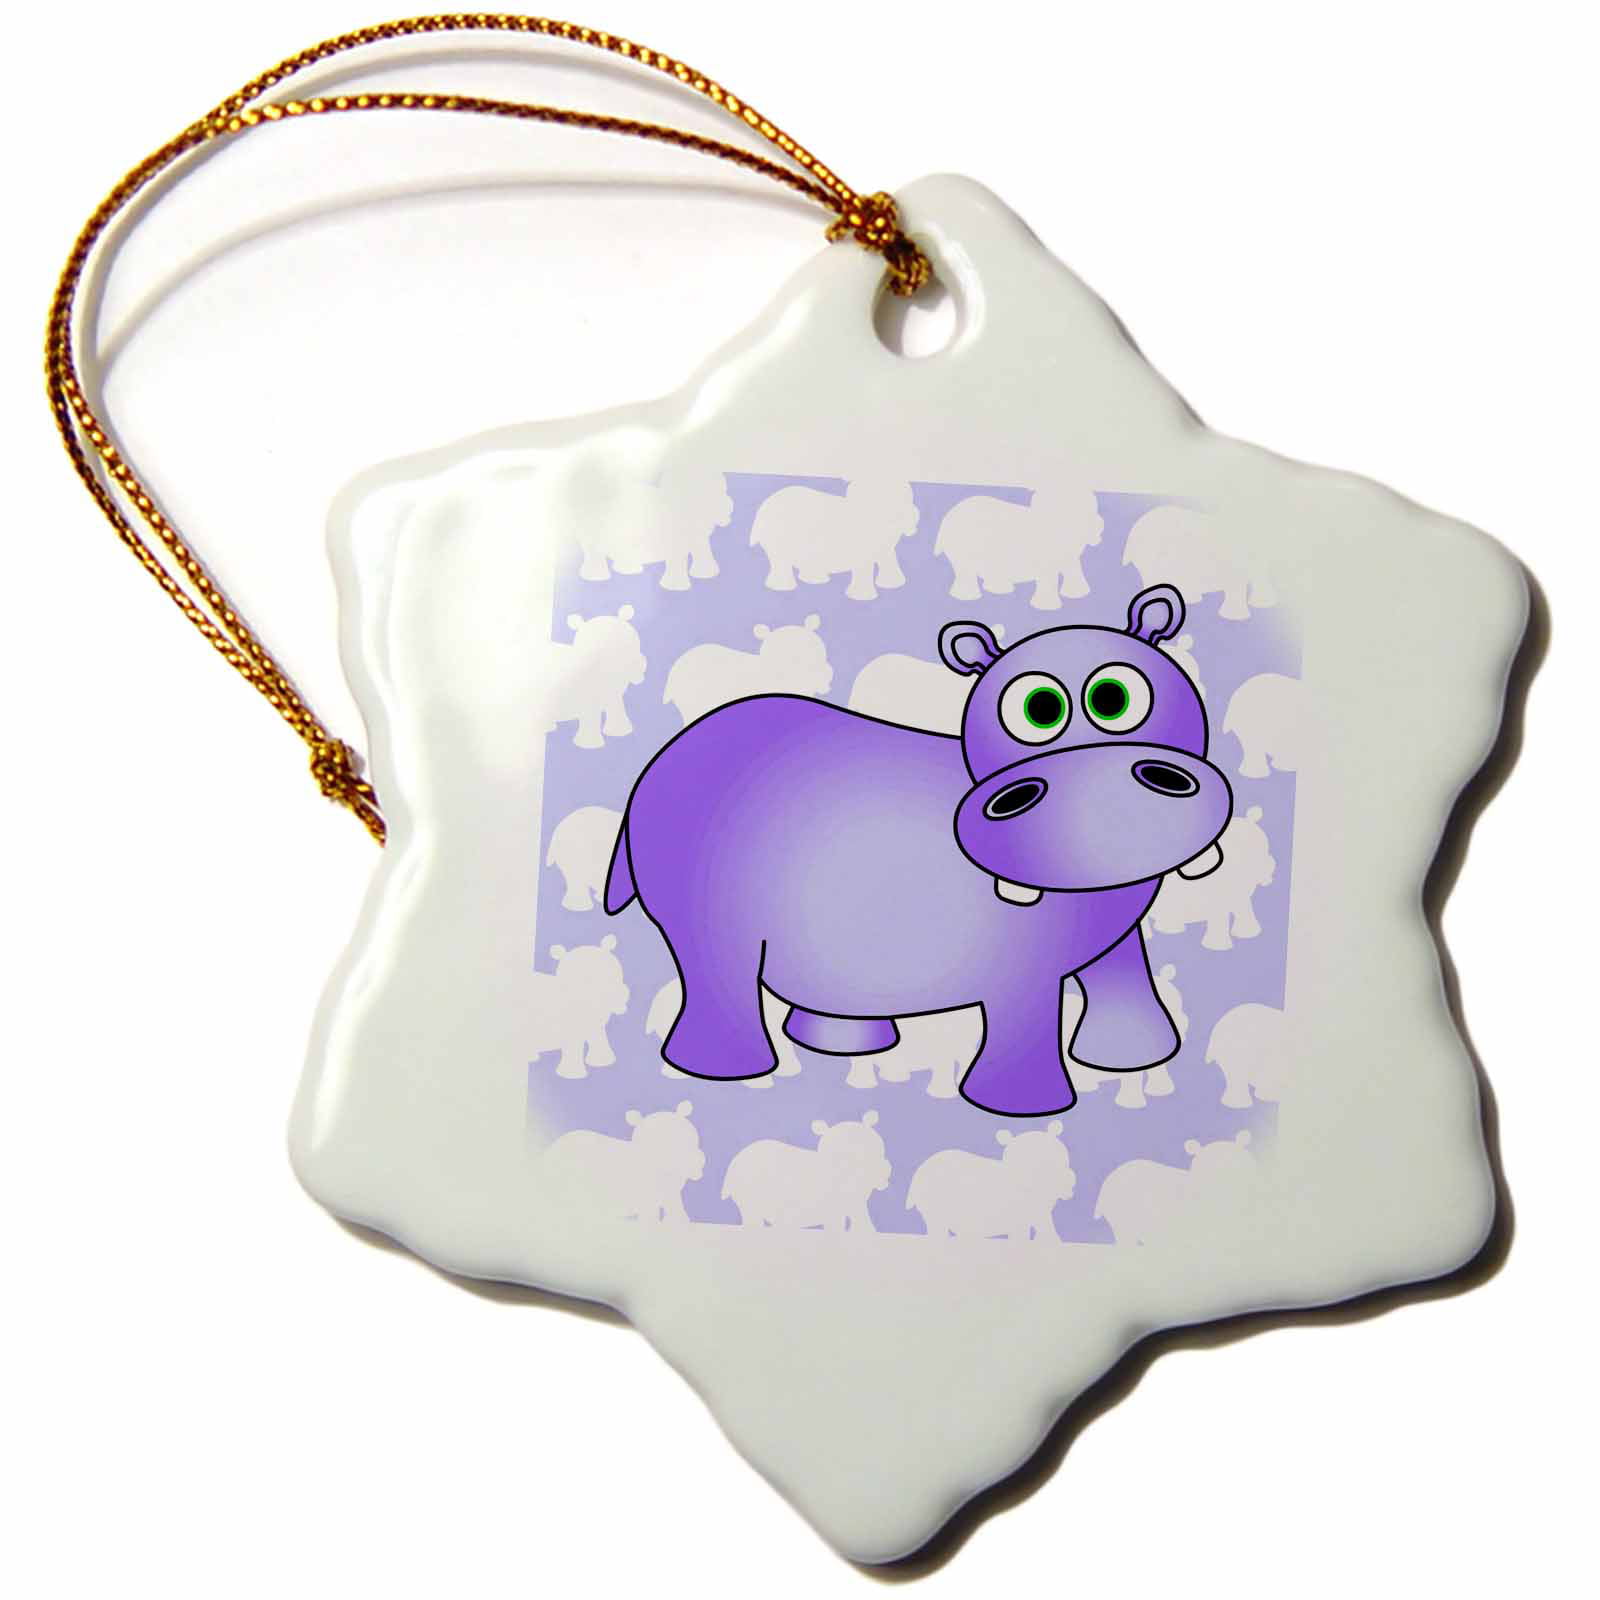 Hanging Ornament by Valentine Herty Pretty Purple Hippopotamus Cute Hippo 3 Inches Porcelain